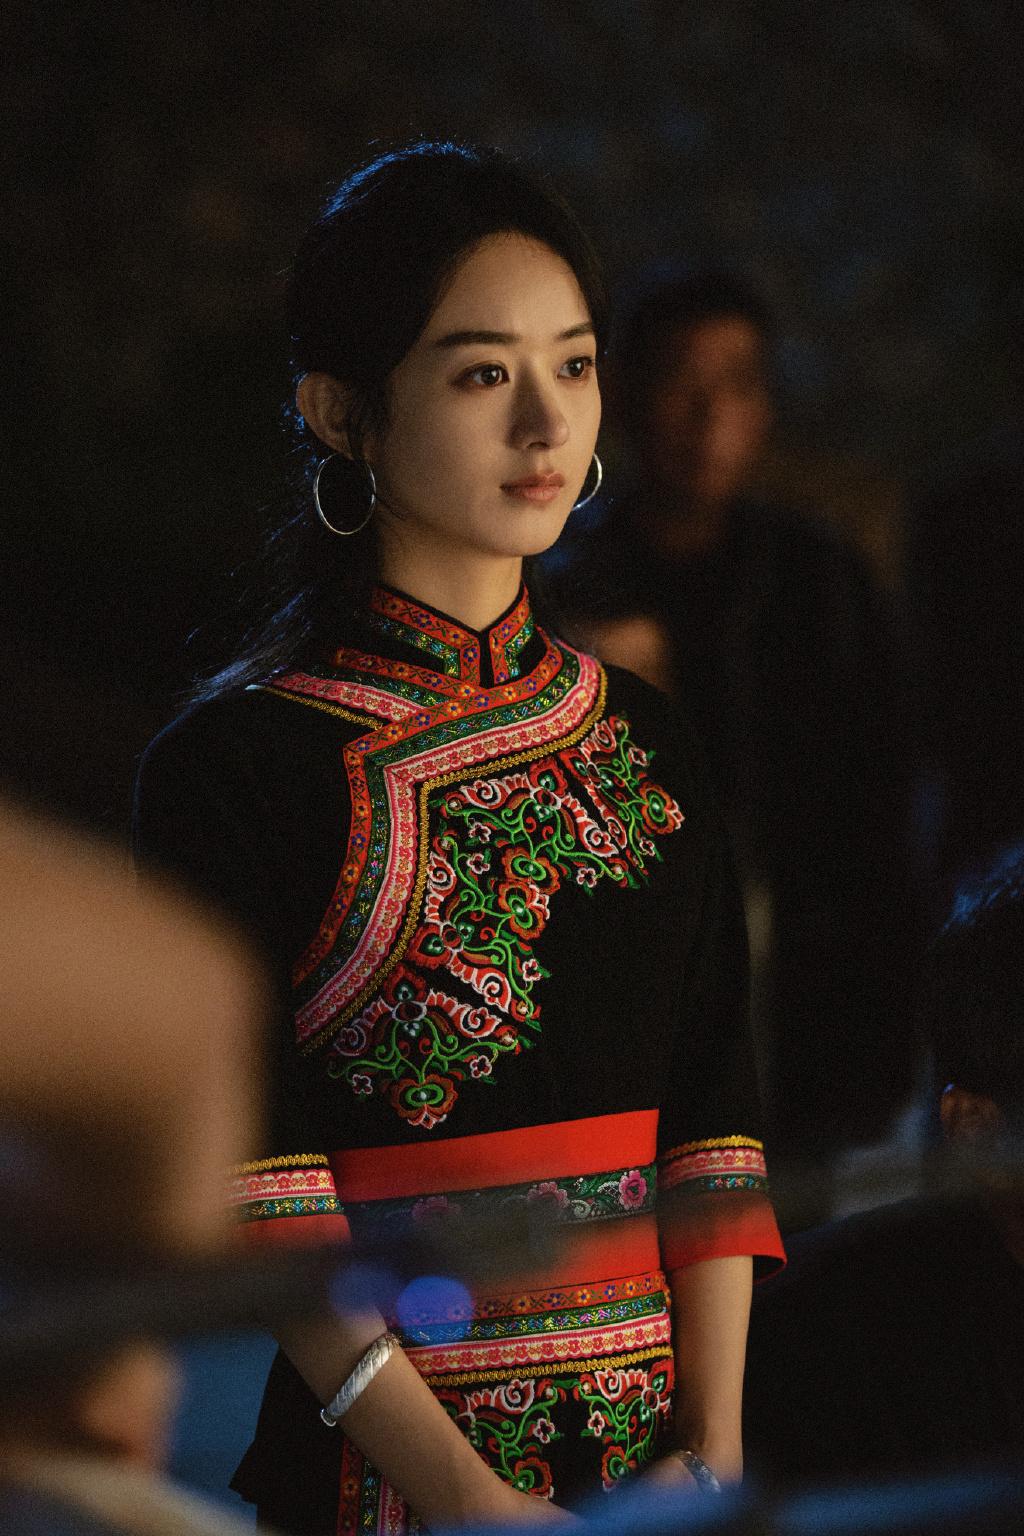 The look favored by many stars such as Zhao Liying and Lan Yingying is ...